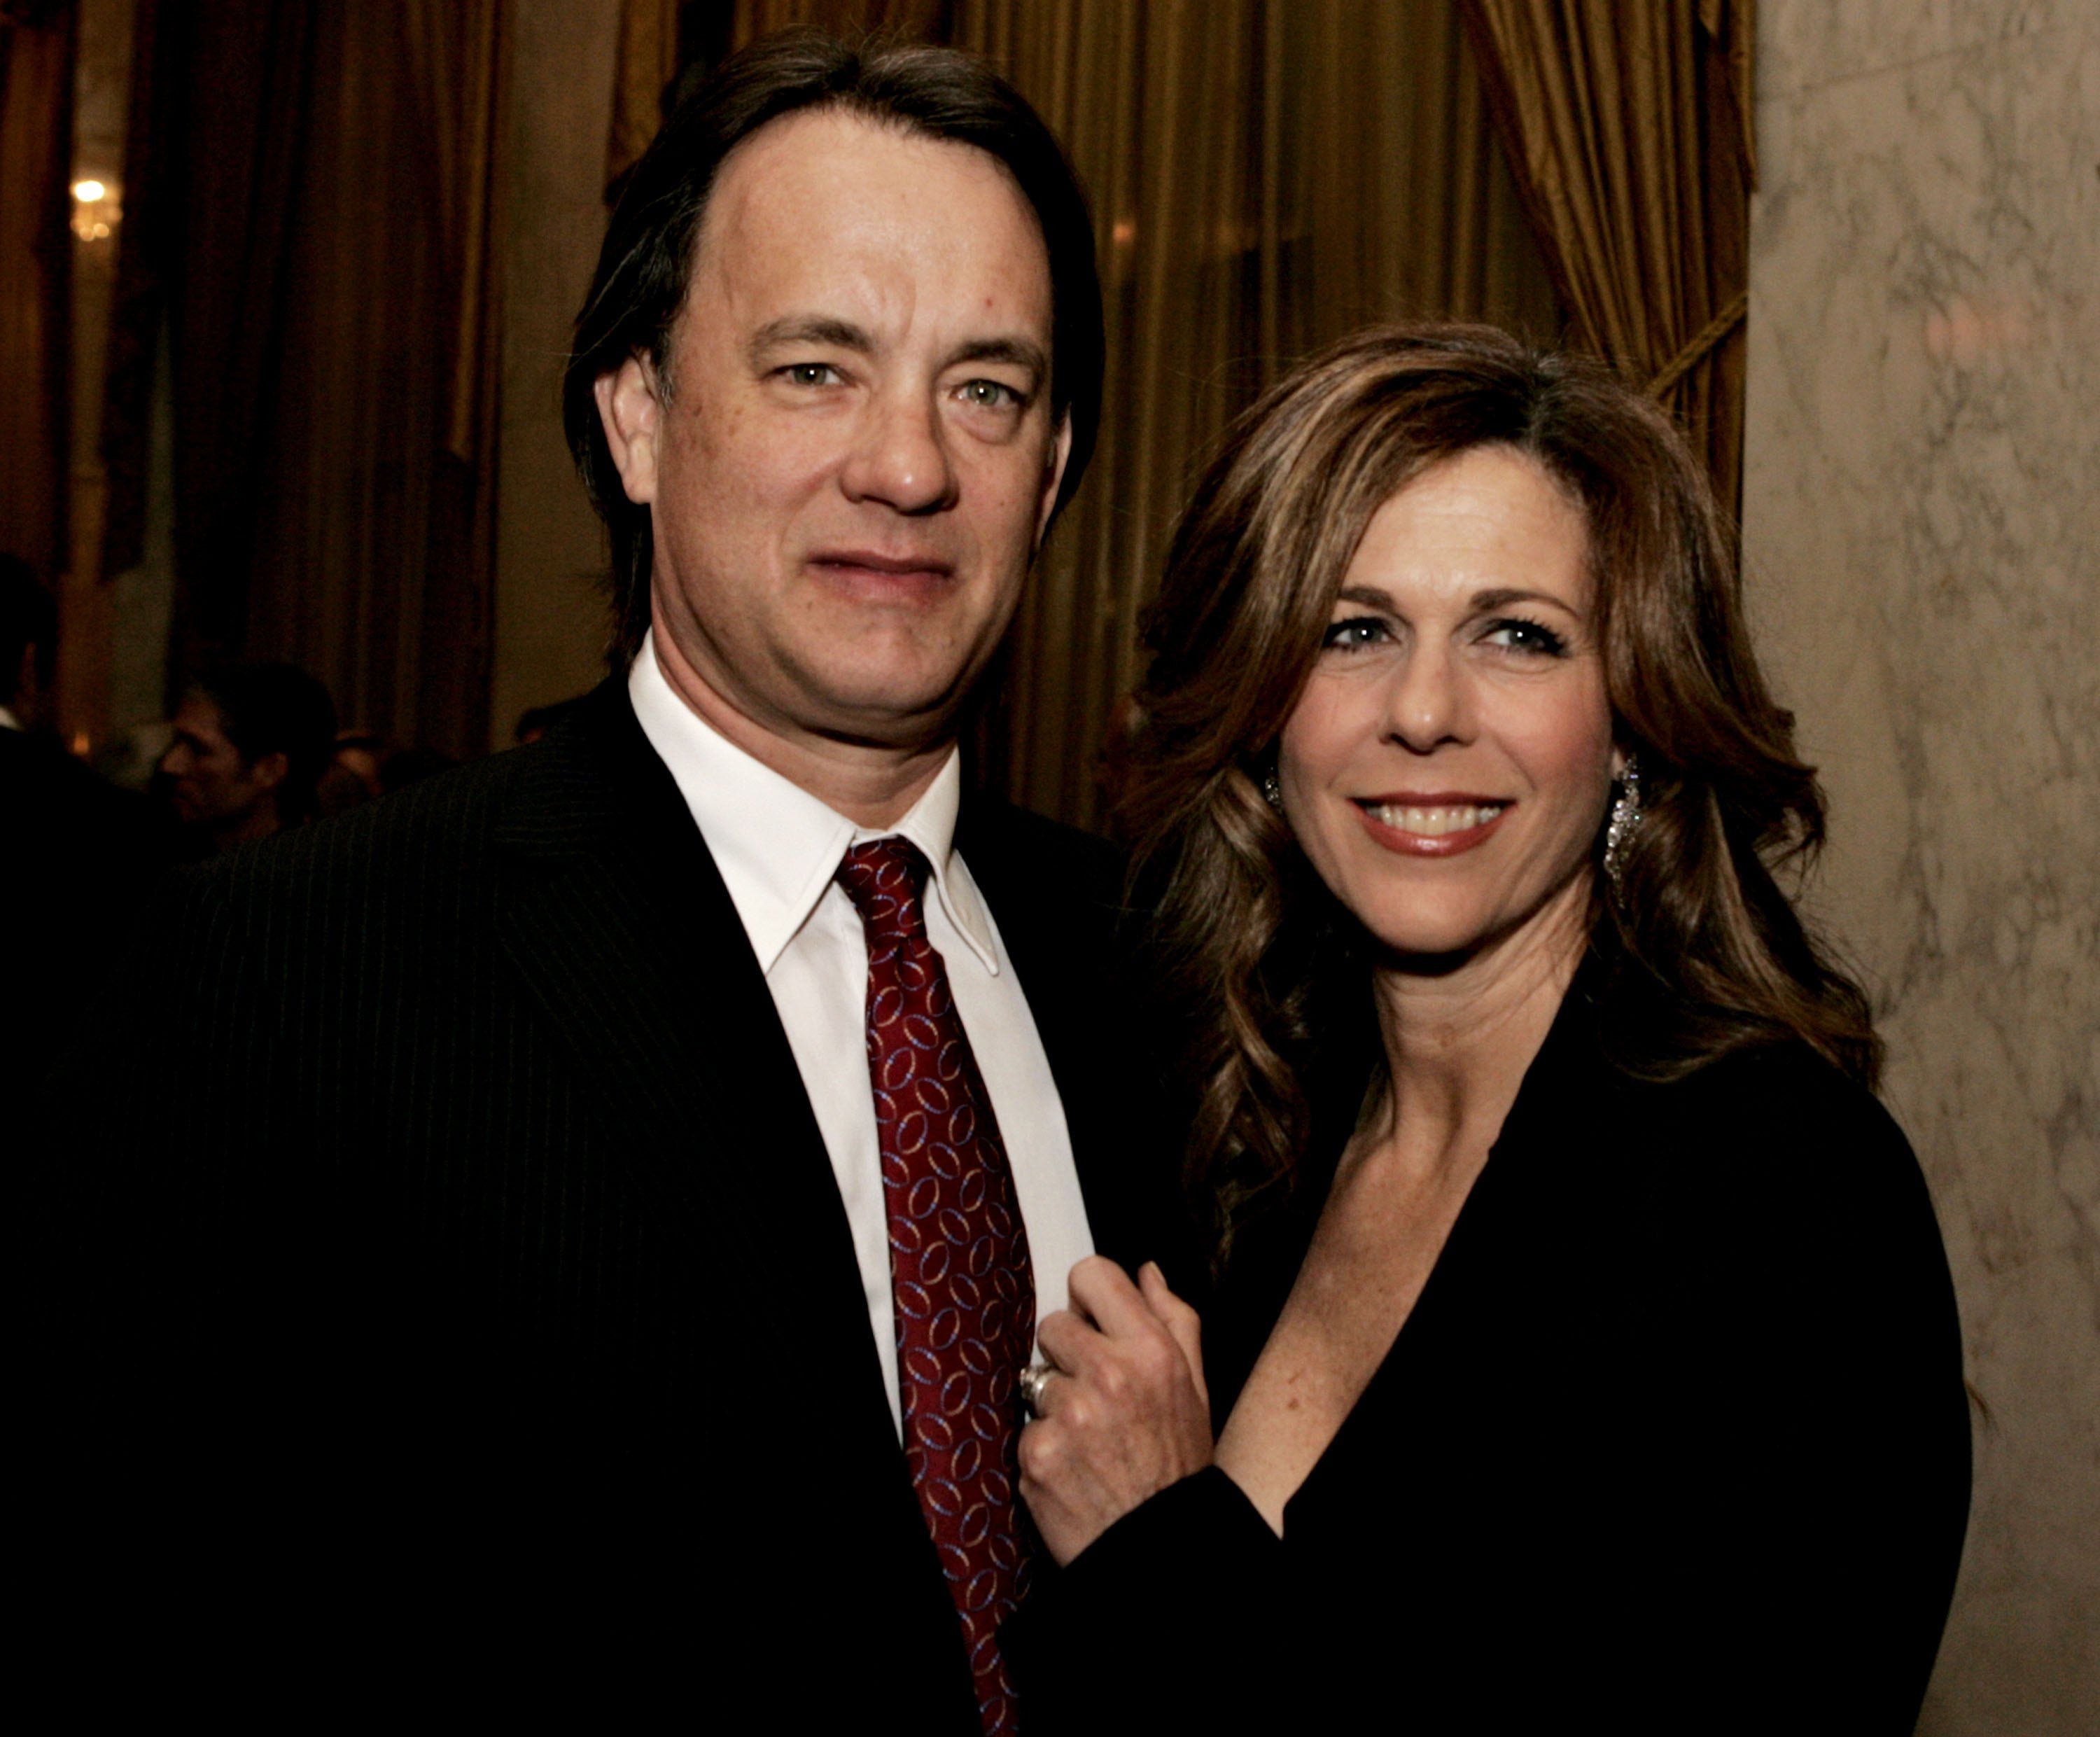 Tom Hanks and Rita Wilson spoke during the EIF's Women's Cancer Research Fund honoring Melissa Etheridge on March 1, 2006 in Beverly Hills, California | Photo: Getty Images